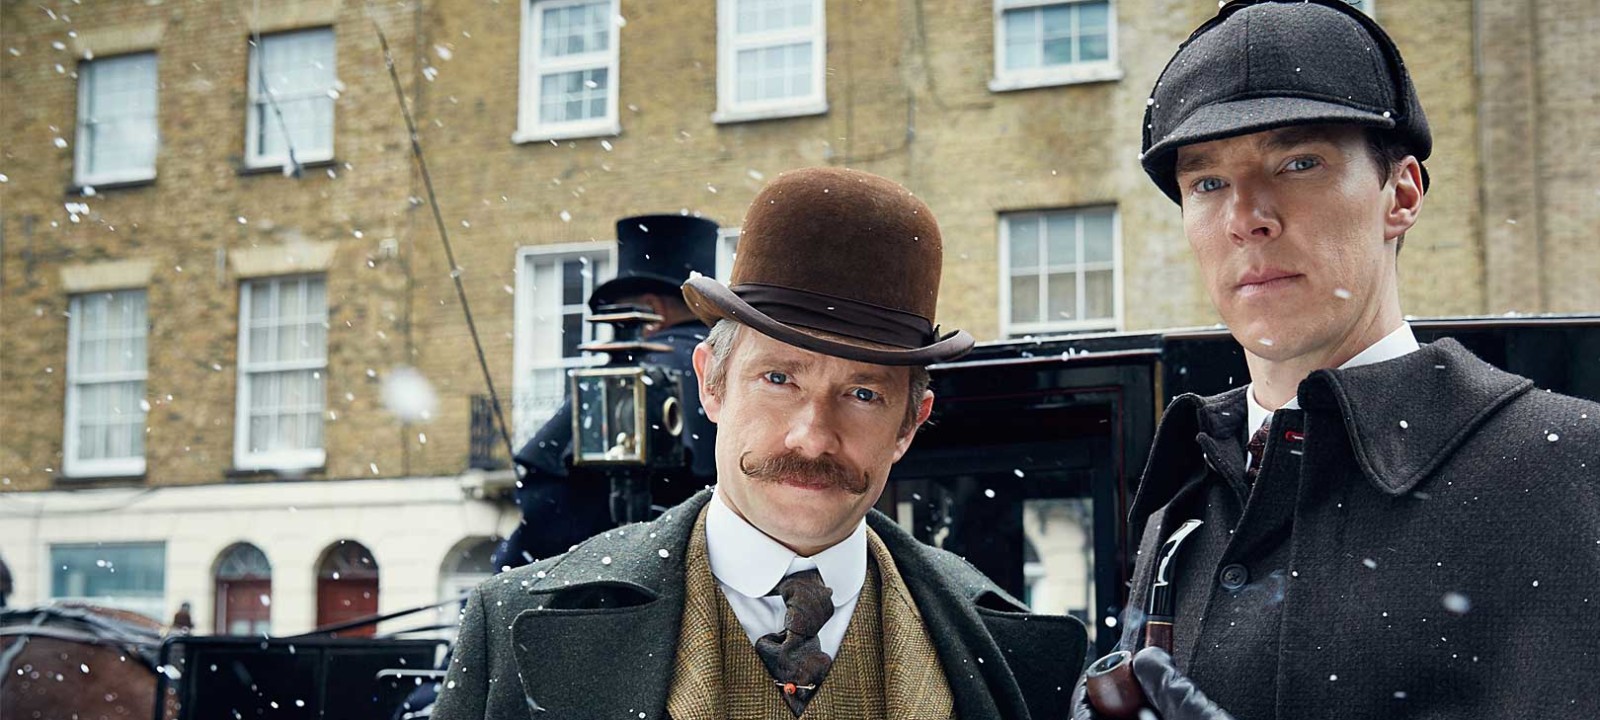 where to watch sherlock the abominable bride encore